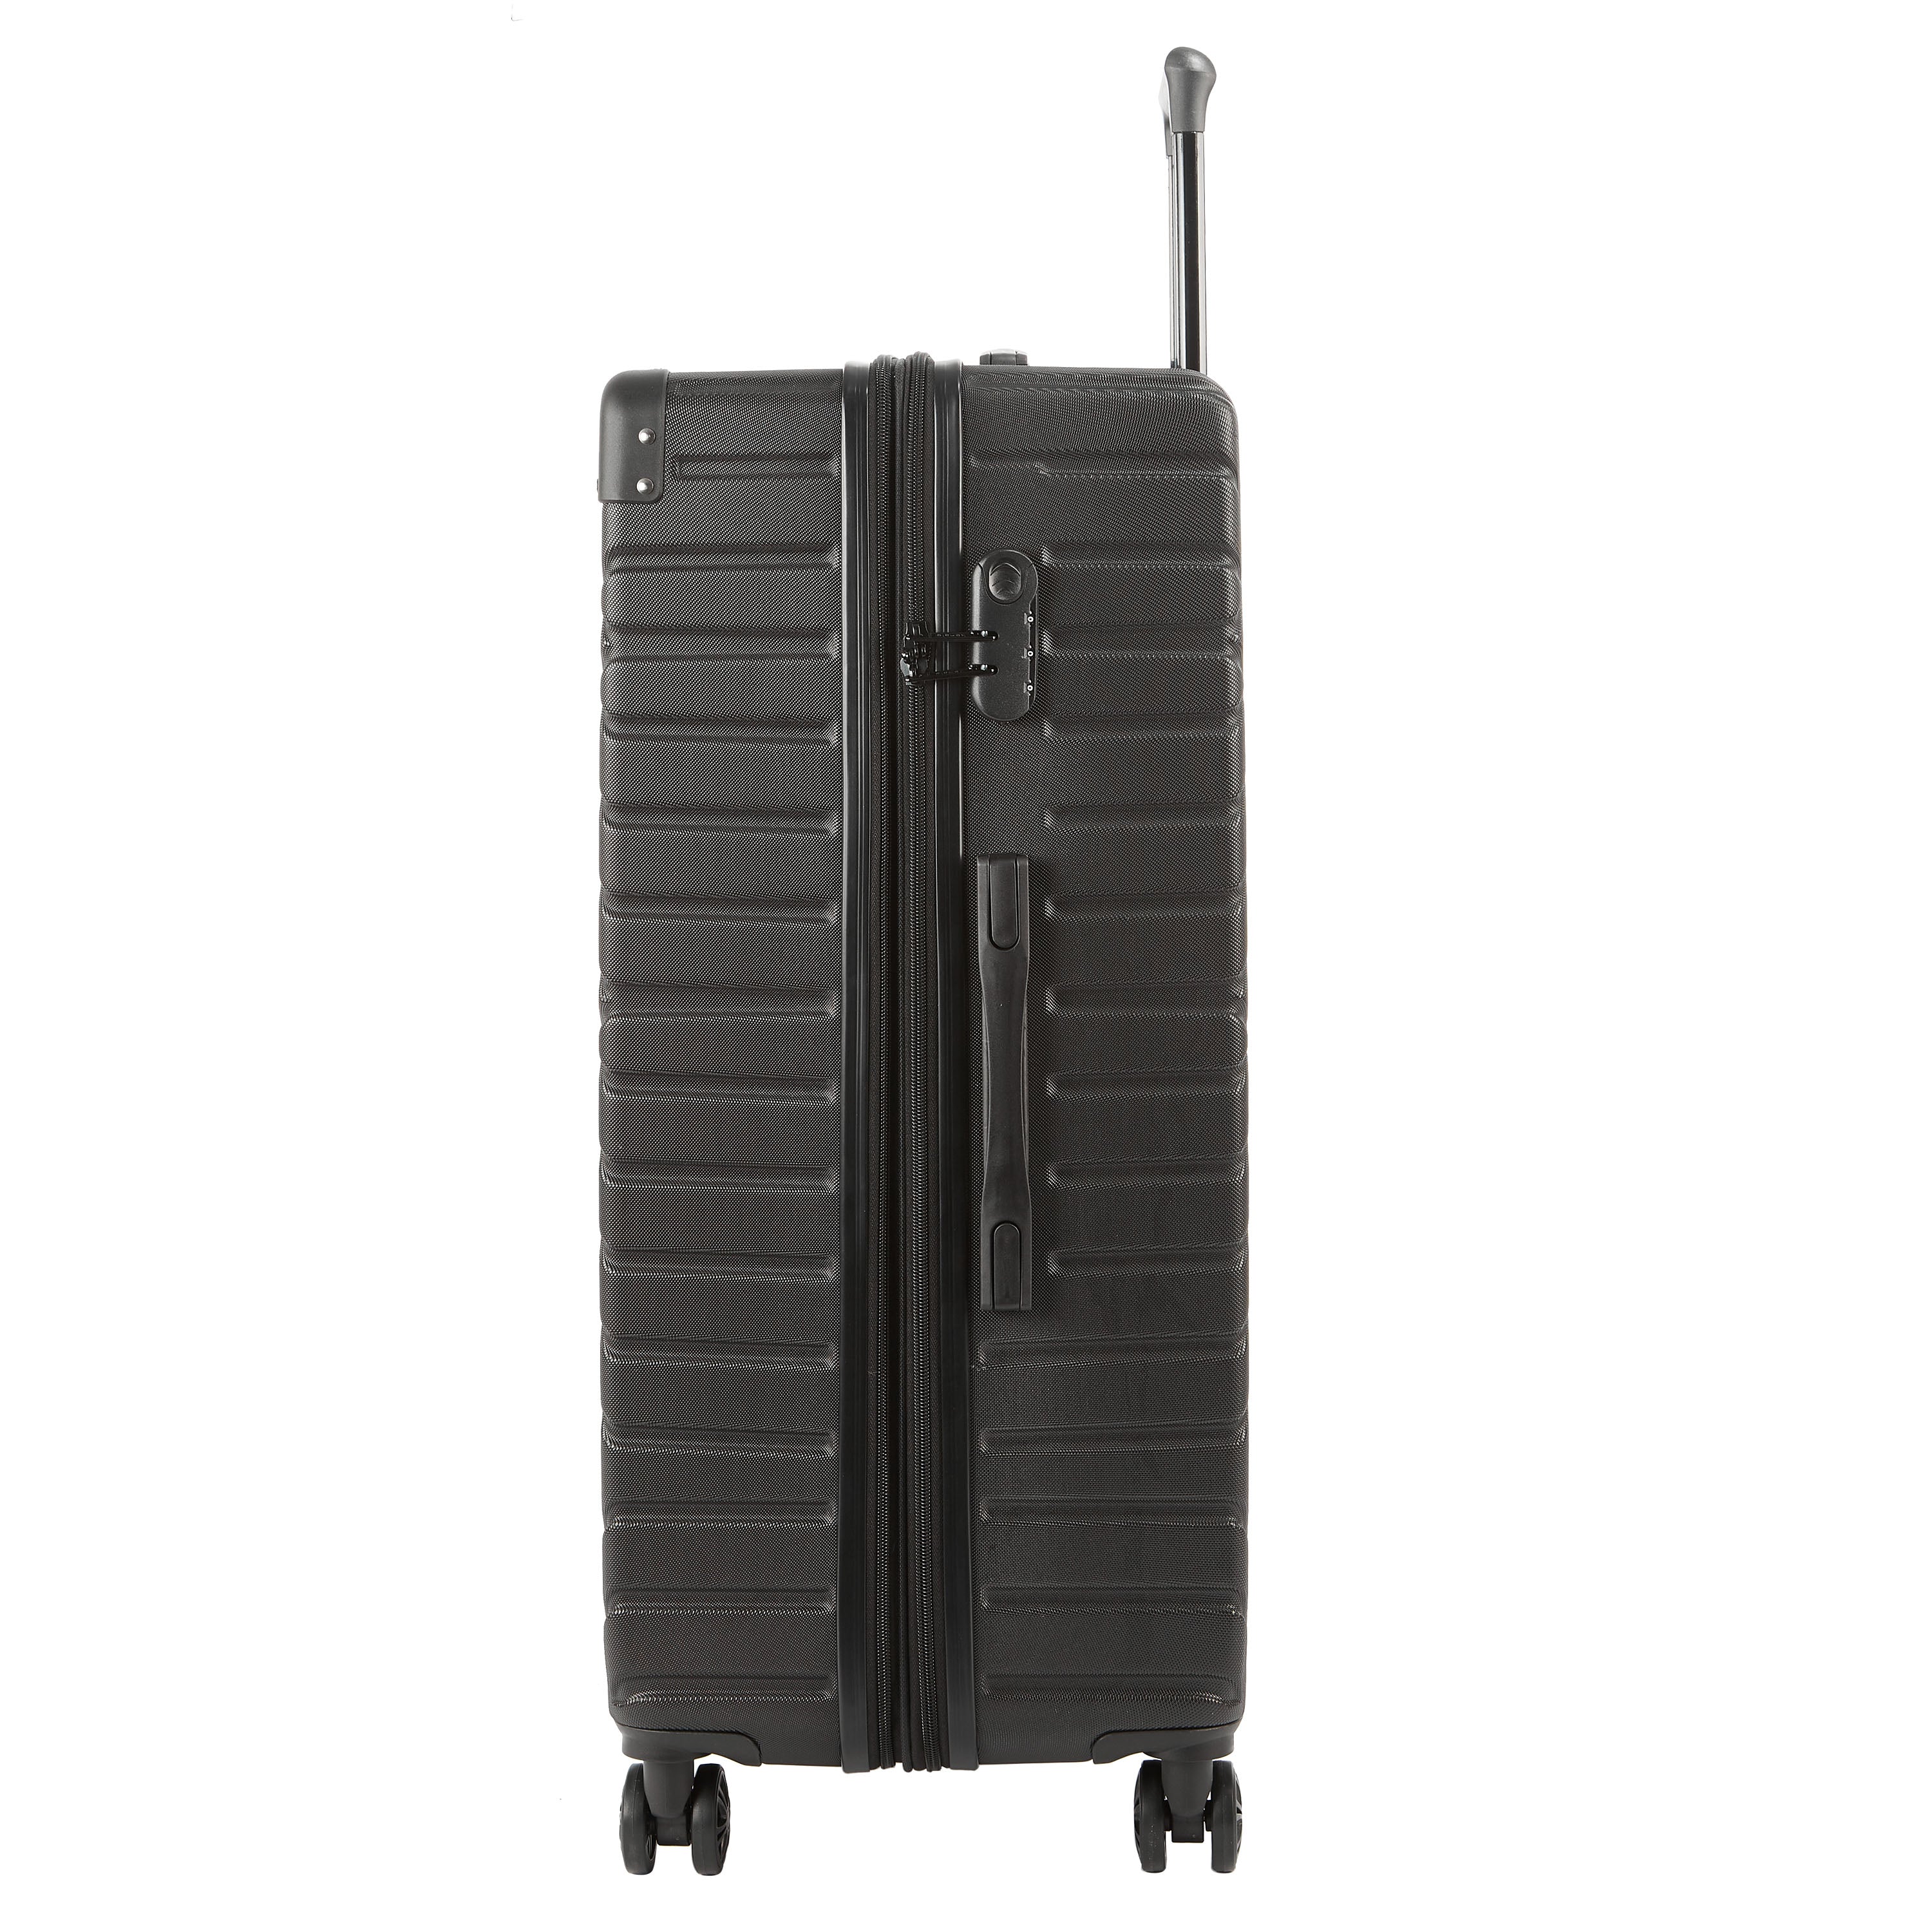 Kensie | Tigard Collection | 3PCS Expandable Hardside Luggage set W/ lock - 8 wheels